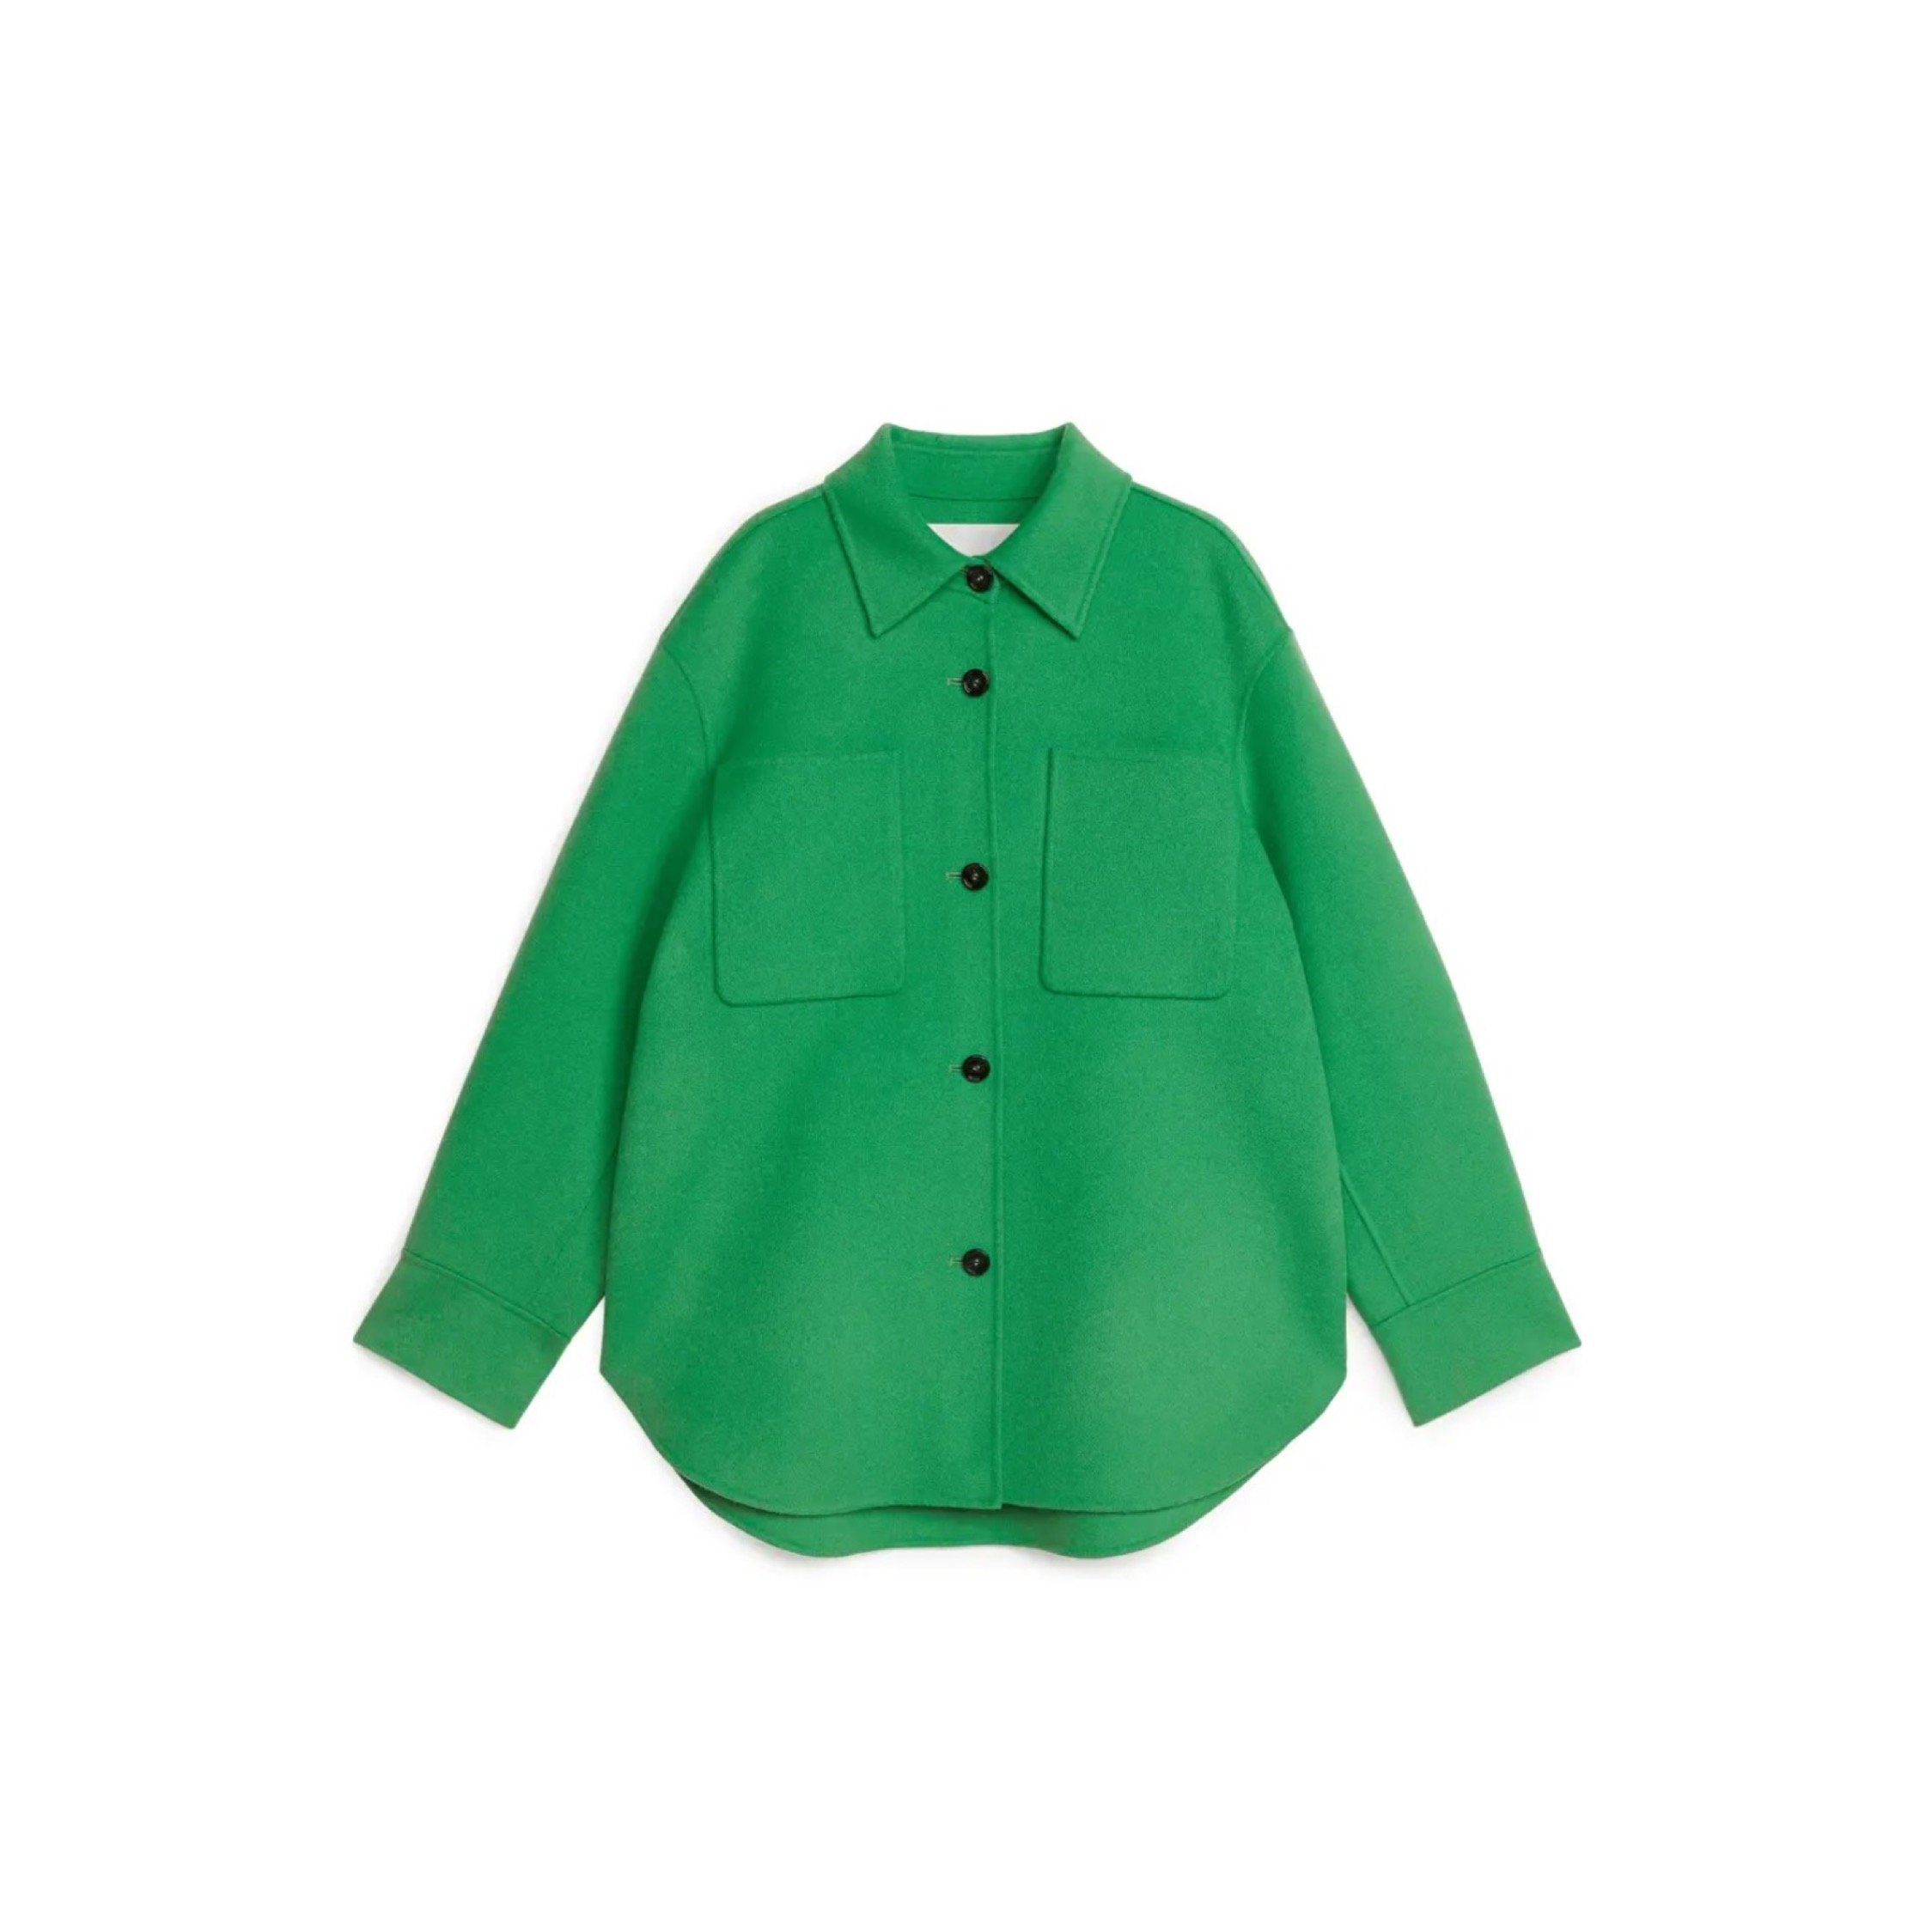 Wool overshirt by Arket - £150